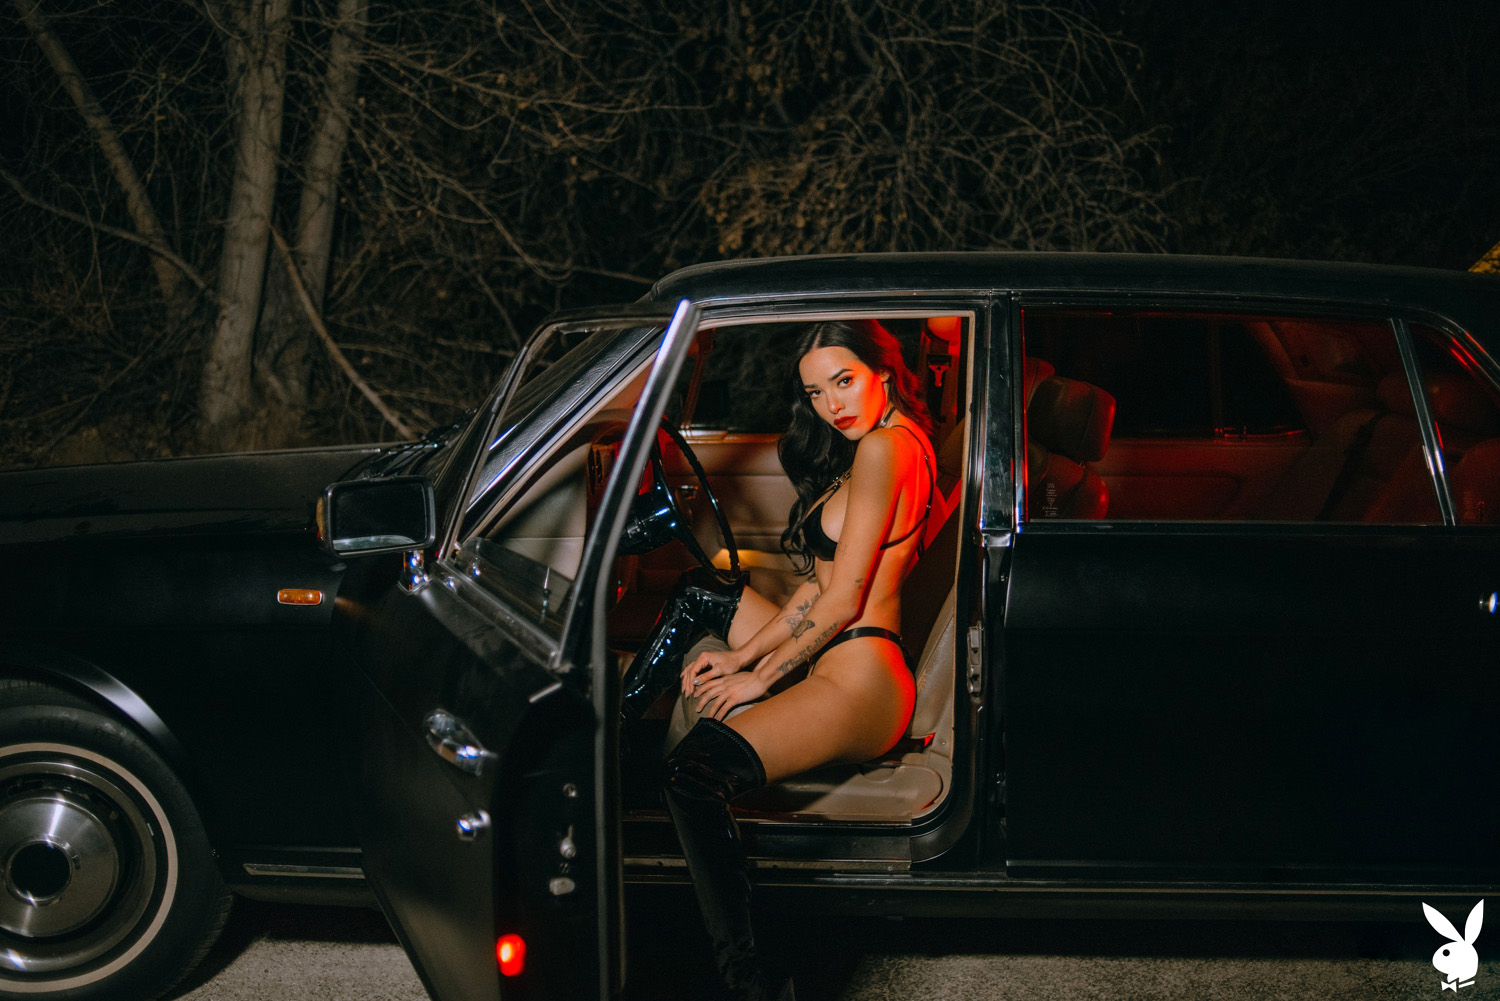 Lily Andrews goes for a late-night drive wearing high heeled latex boots